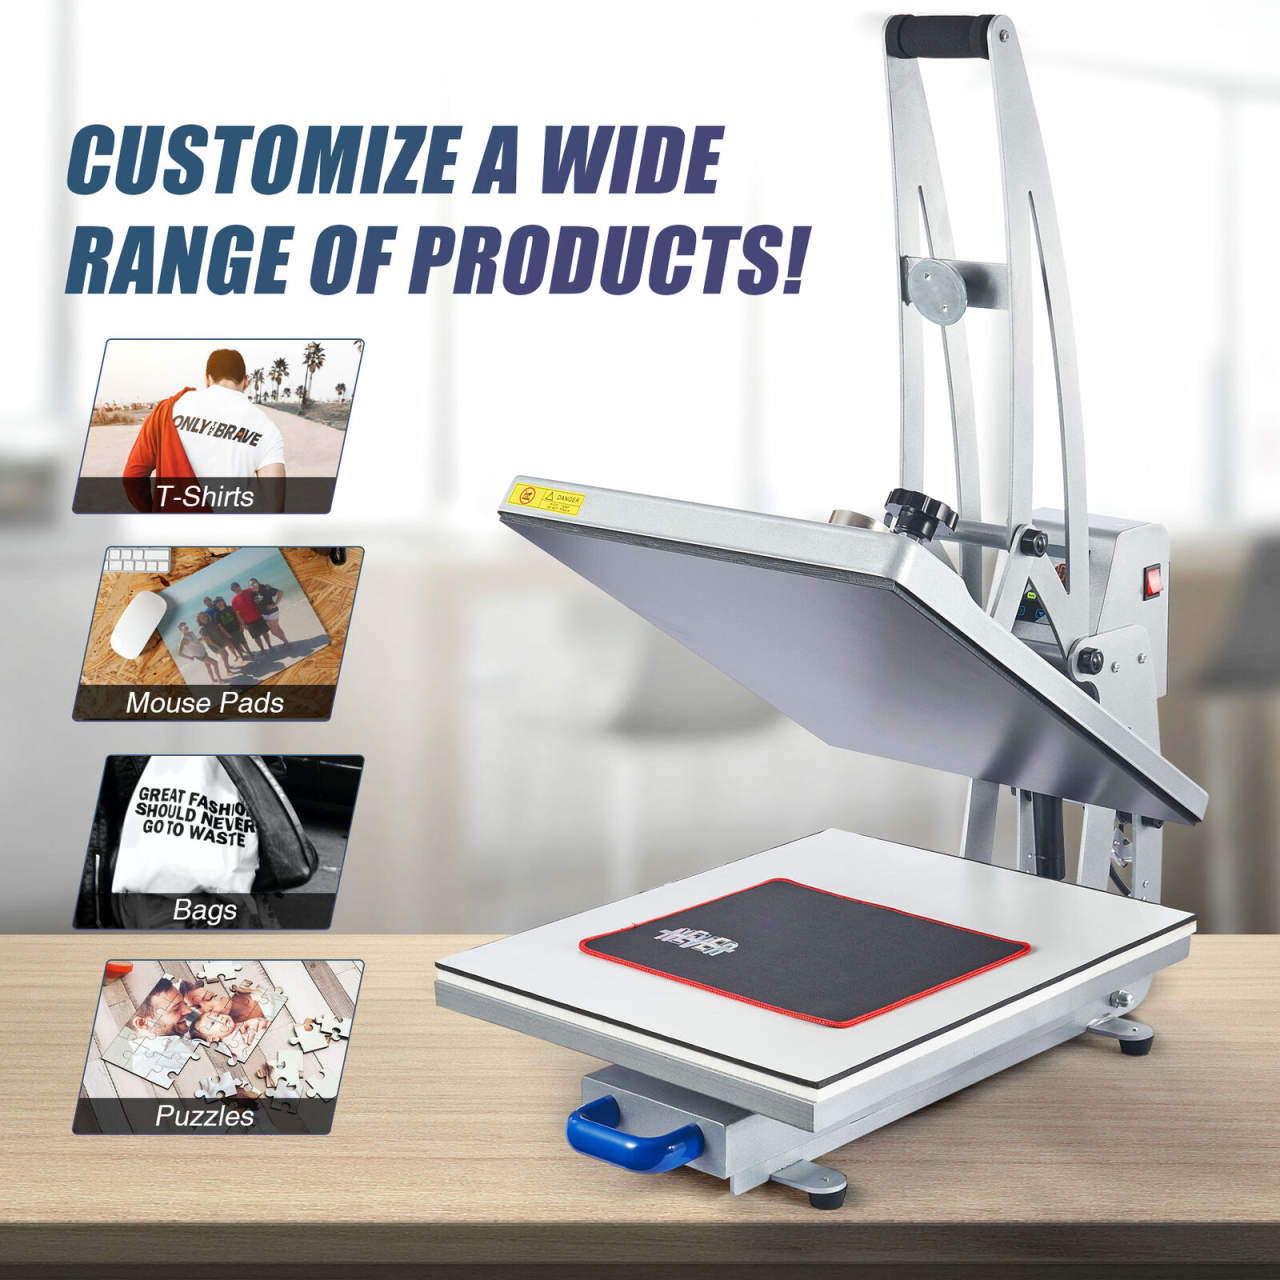 16"x20" Heat Press - Auto Open - Clamshell W Pullout Tray